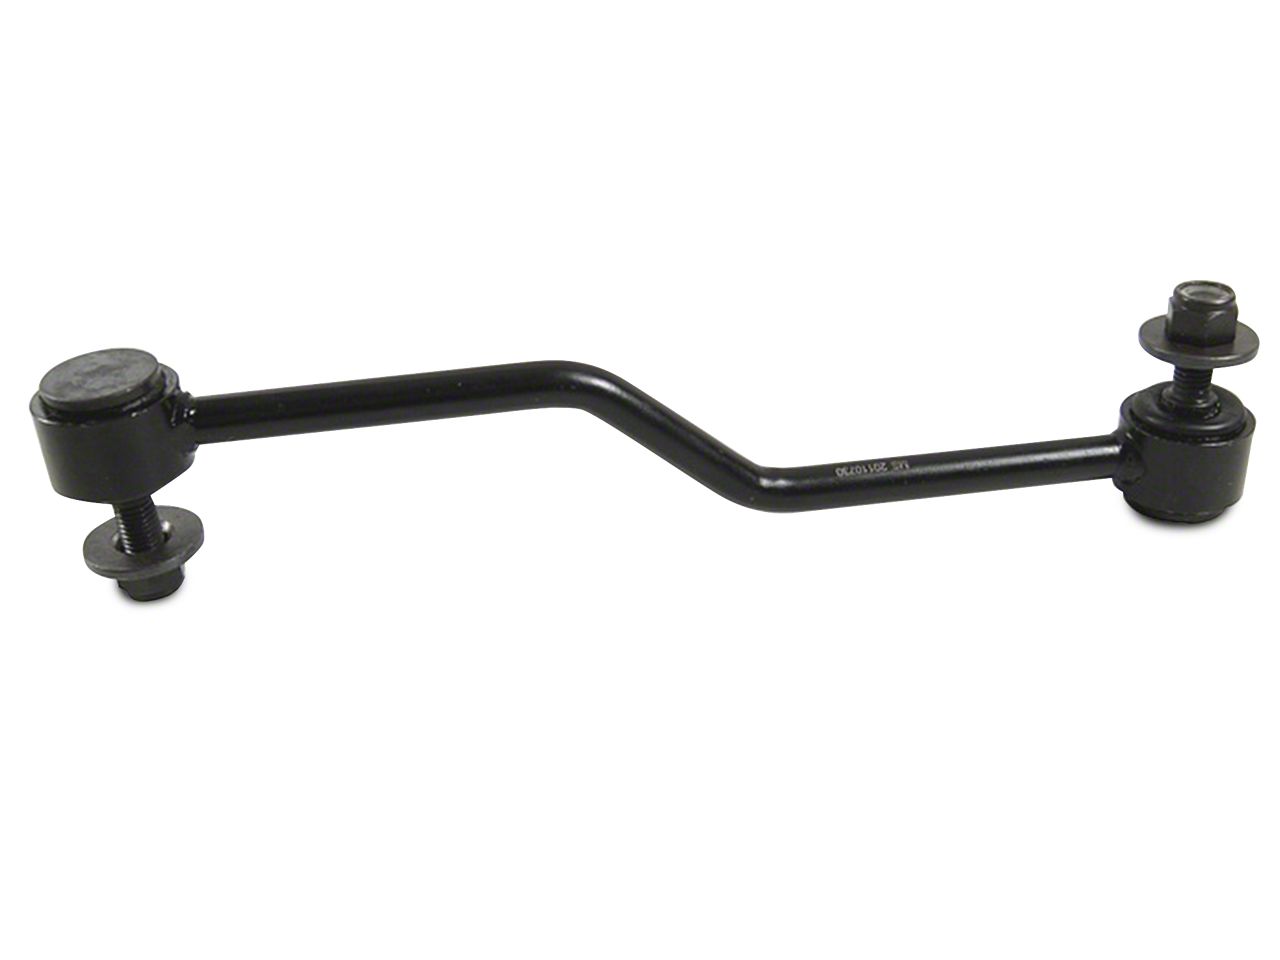 F150 Sway Bars & End Links 2004-2008